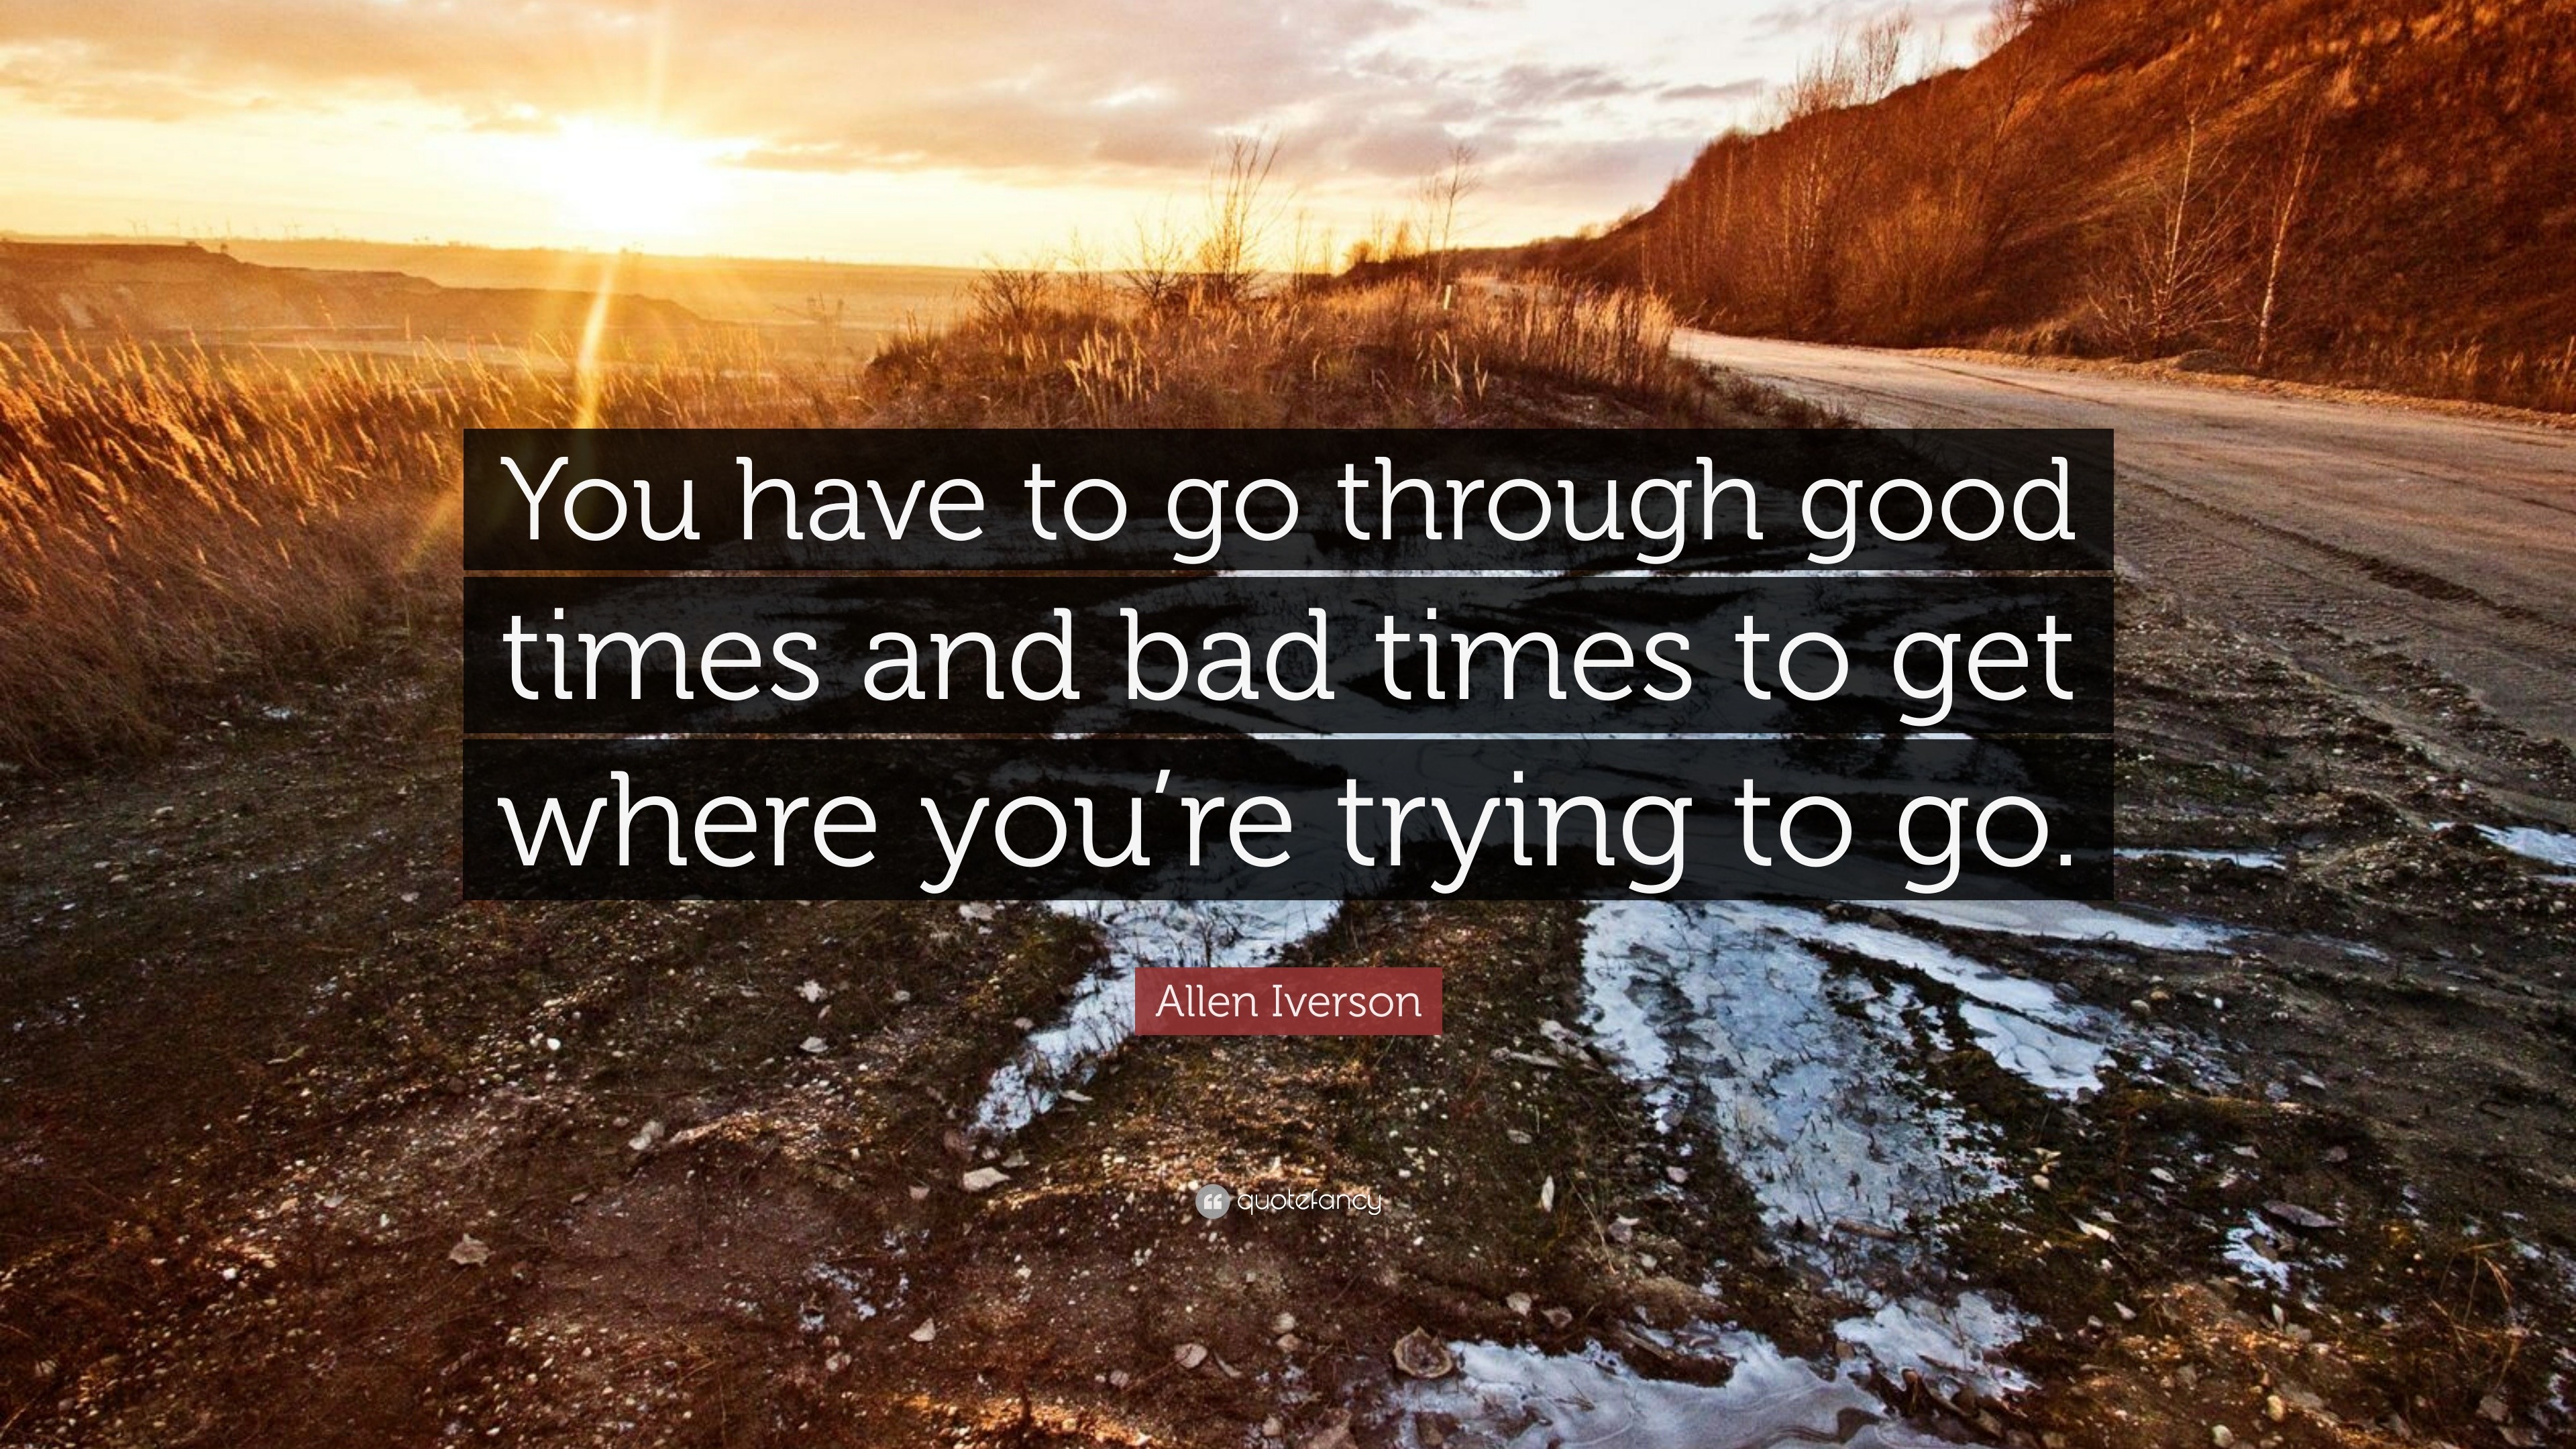 Allen Iverson Quote: “You have to go through good times and bad times ...